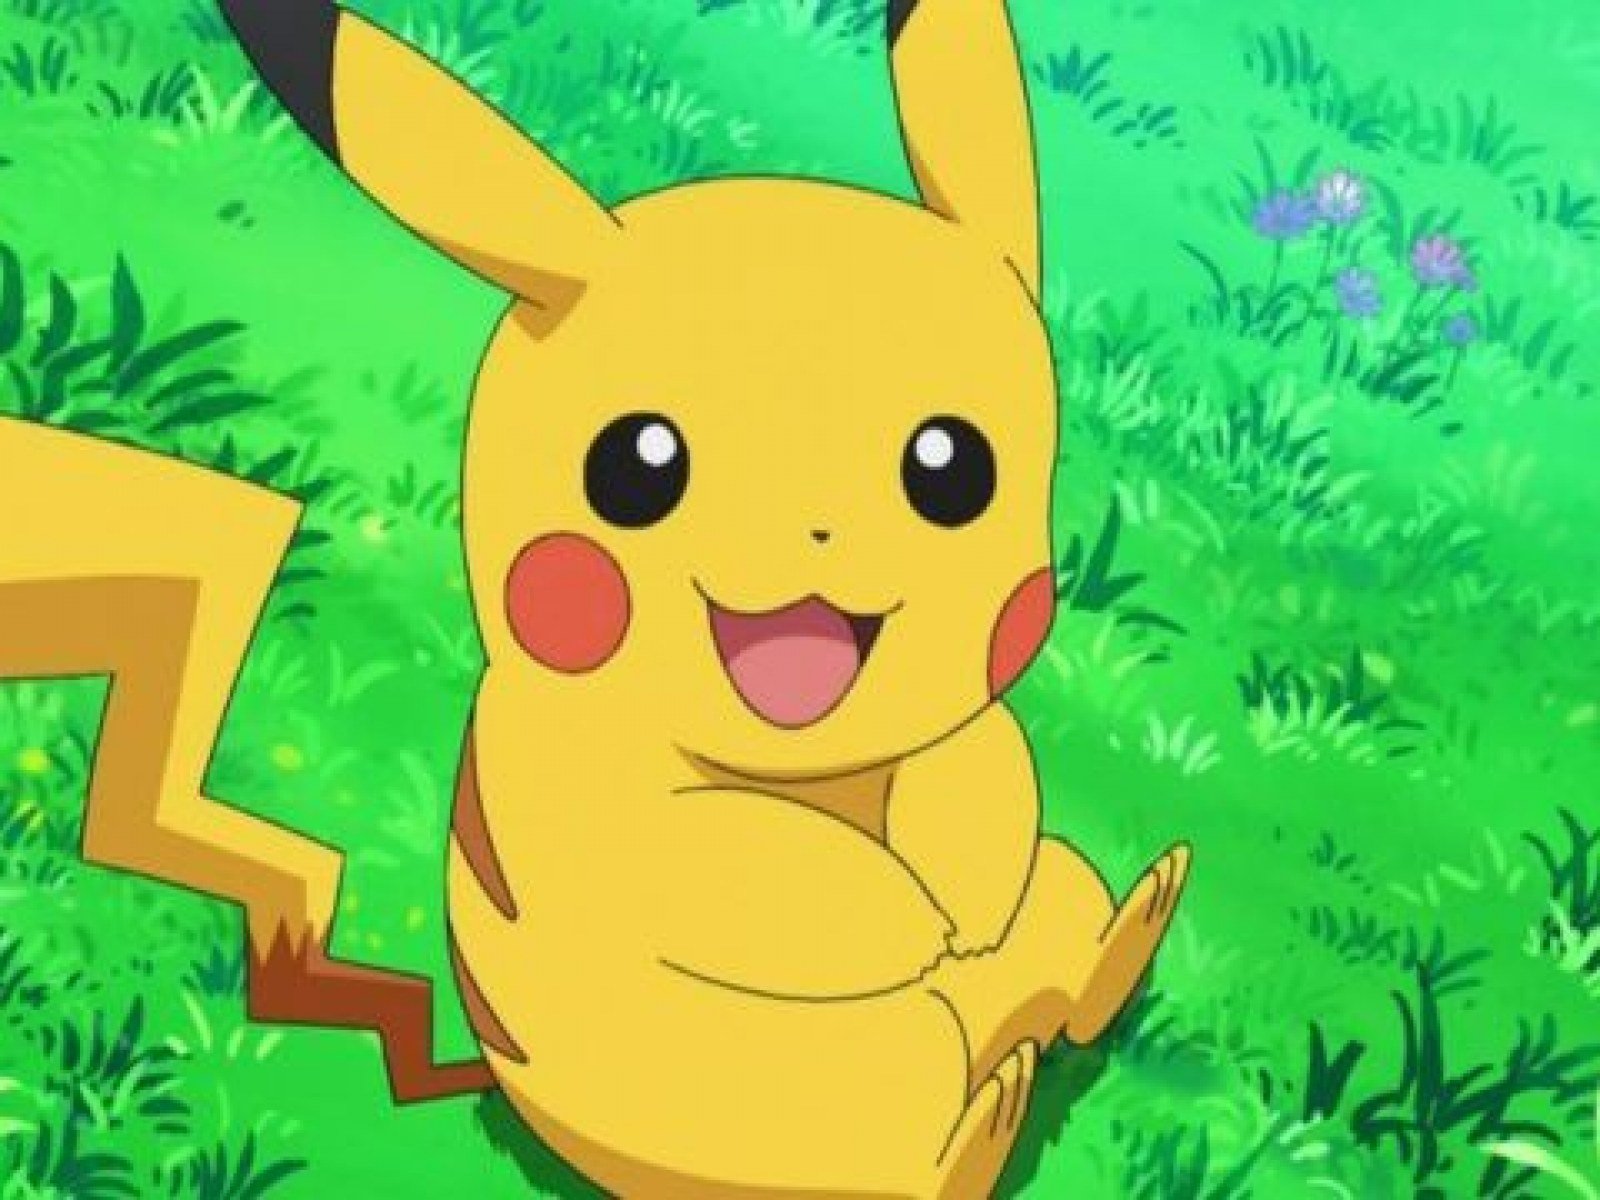 Say Hello To The Pikachu Voice Actor That Gives The Little Mascot A